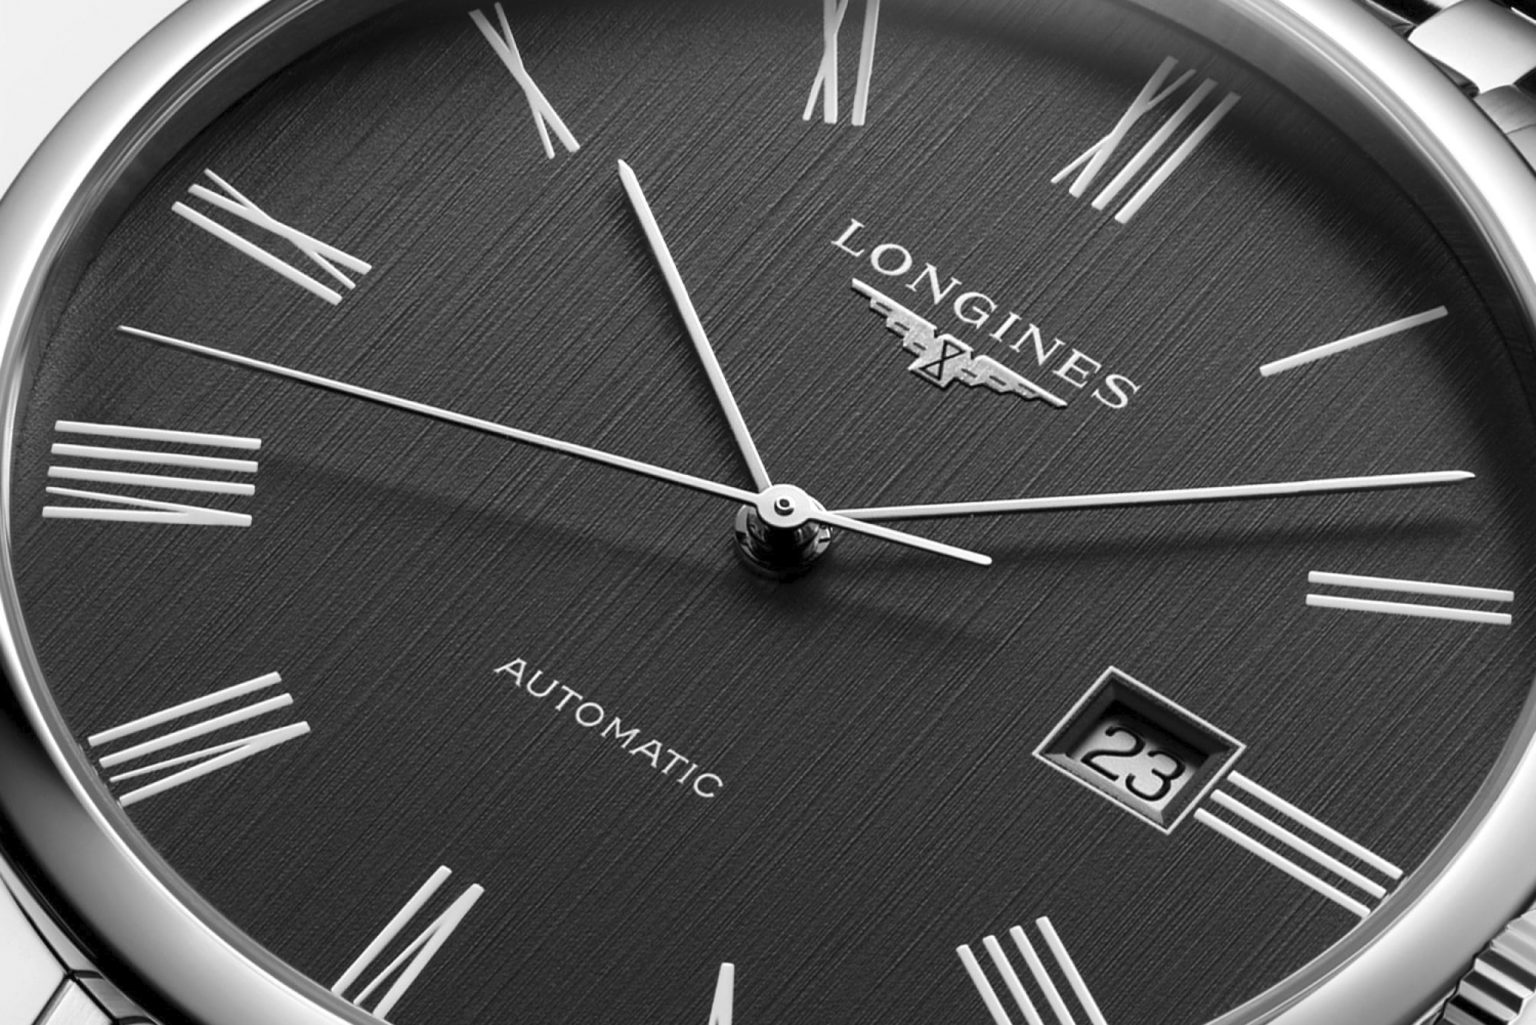 The Best New Watches at Longines’ Canadian E-Boutique